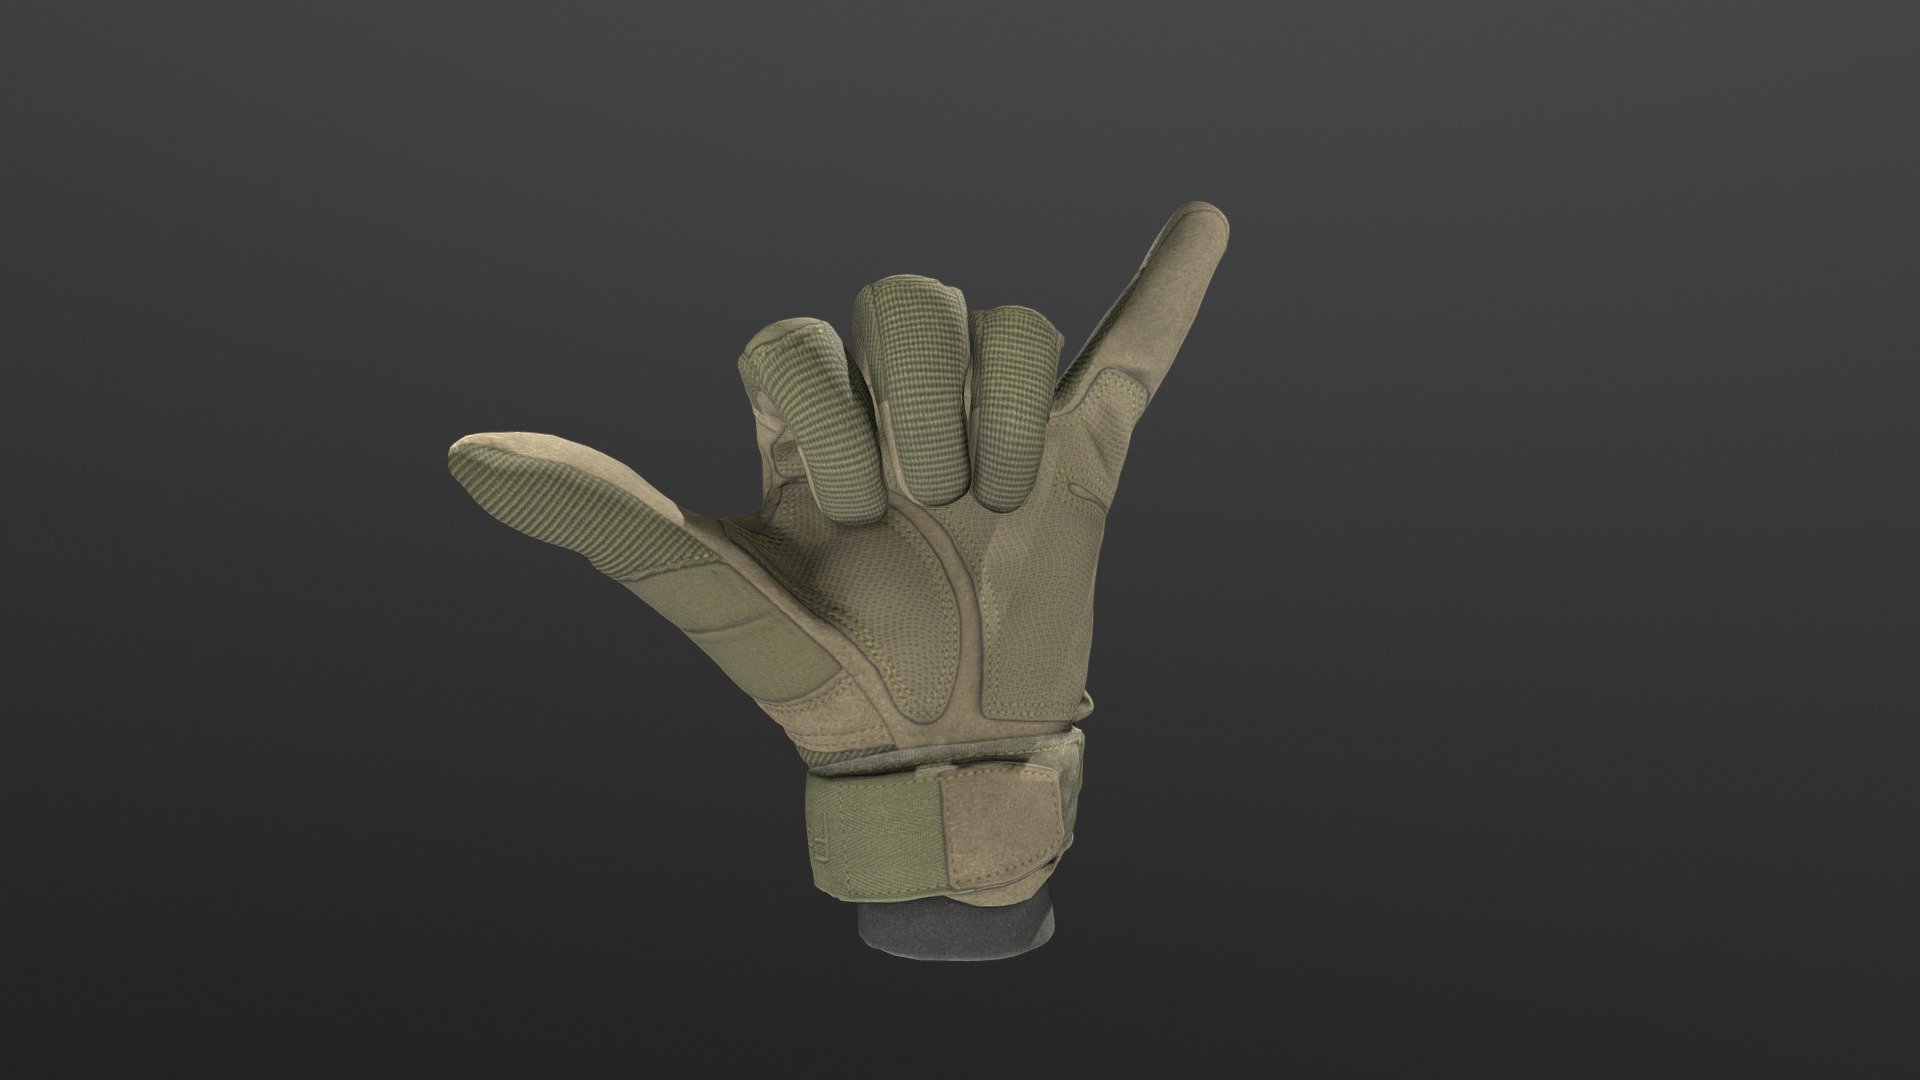 Buy Tactical Glove with hand positions 3D Model. 